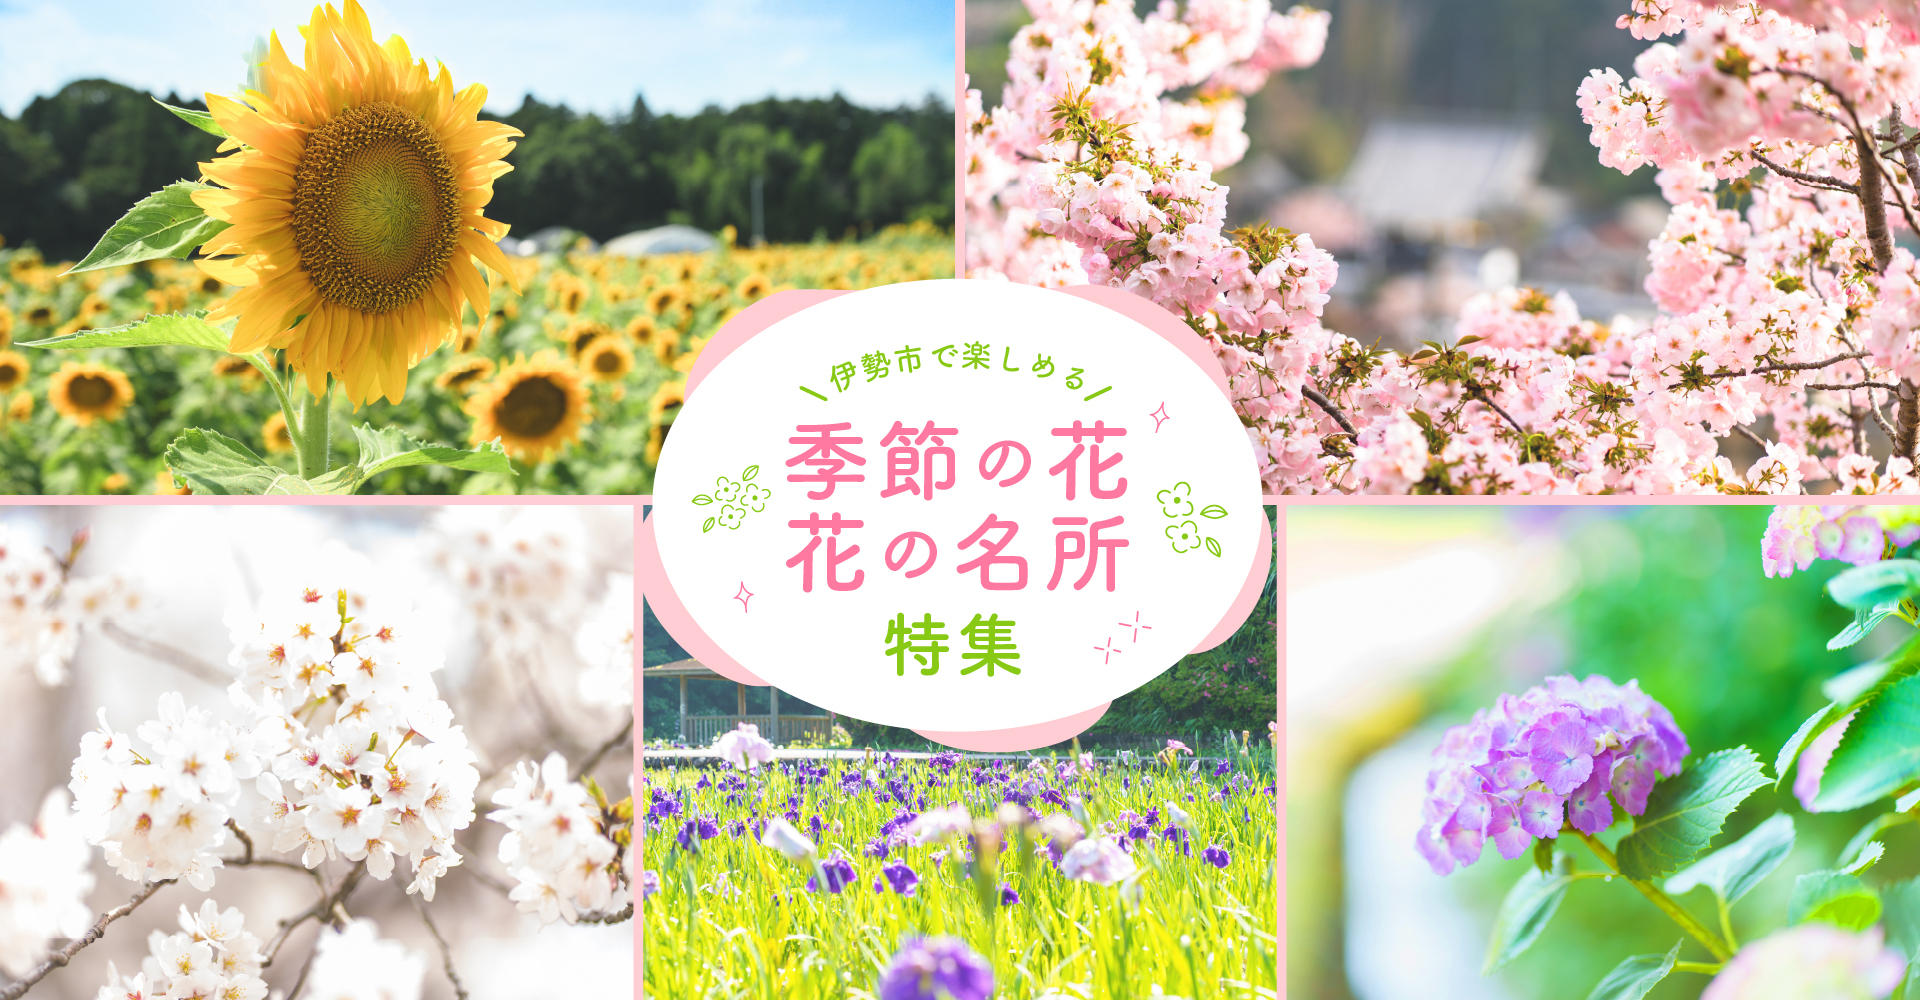 Special feature on seasonal flowers and flower spots you can enjoy in Ise City